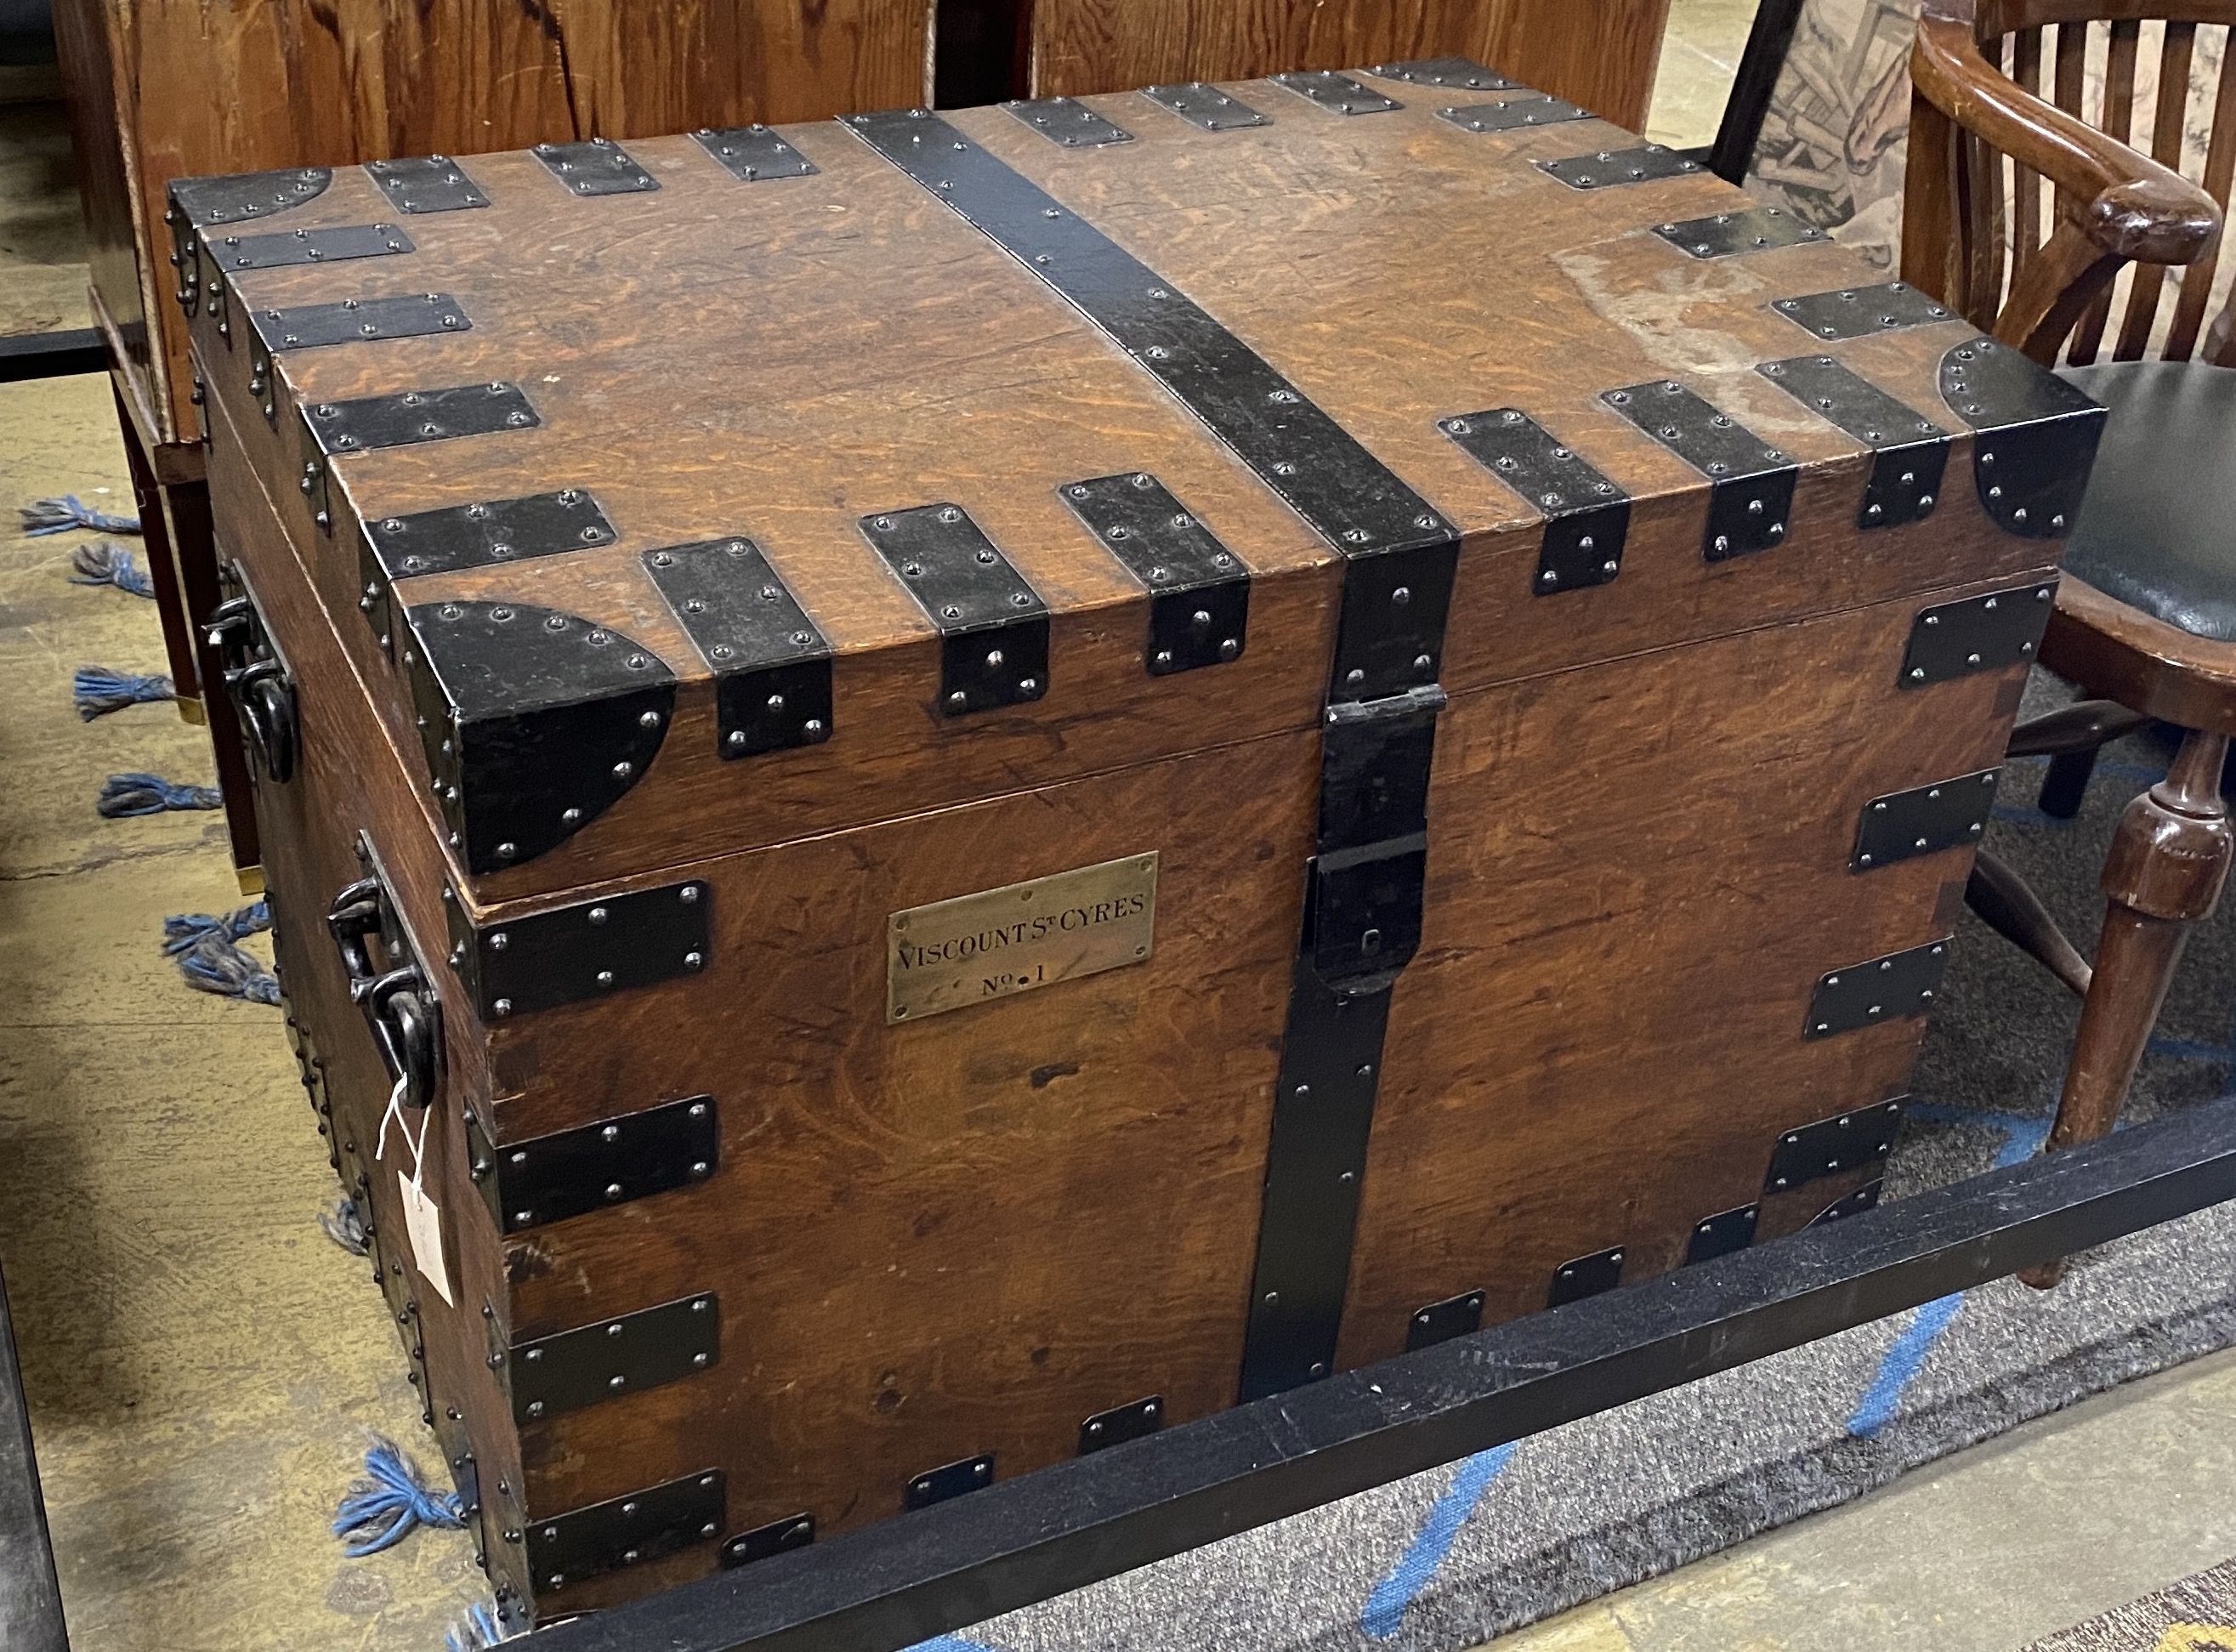 A Victorian iron bound oak silver chest, the engraved brass plaque reads 'Viscount St Cyers No 1', width 89cm, depth 63cm, height 65cm